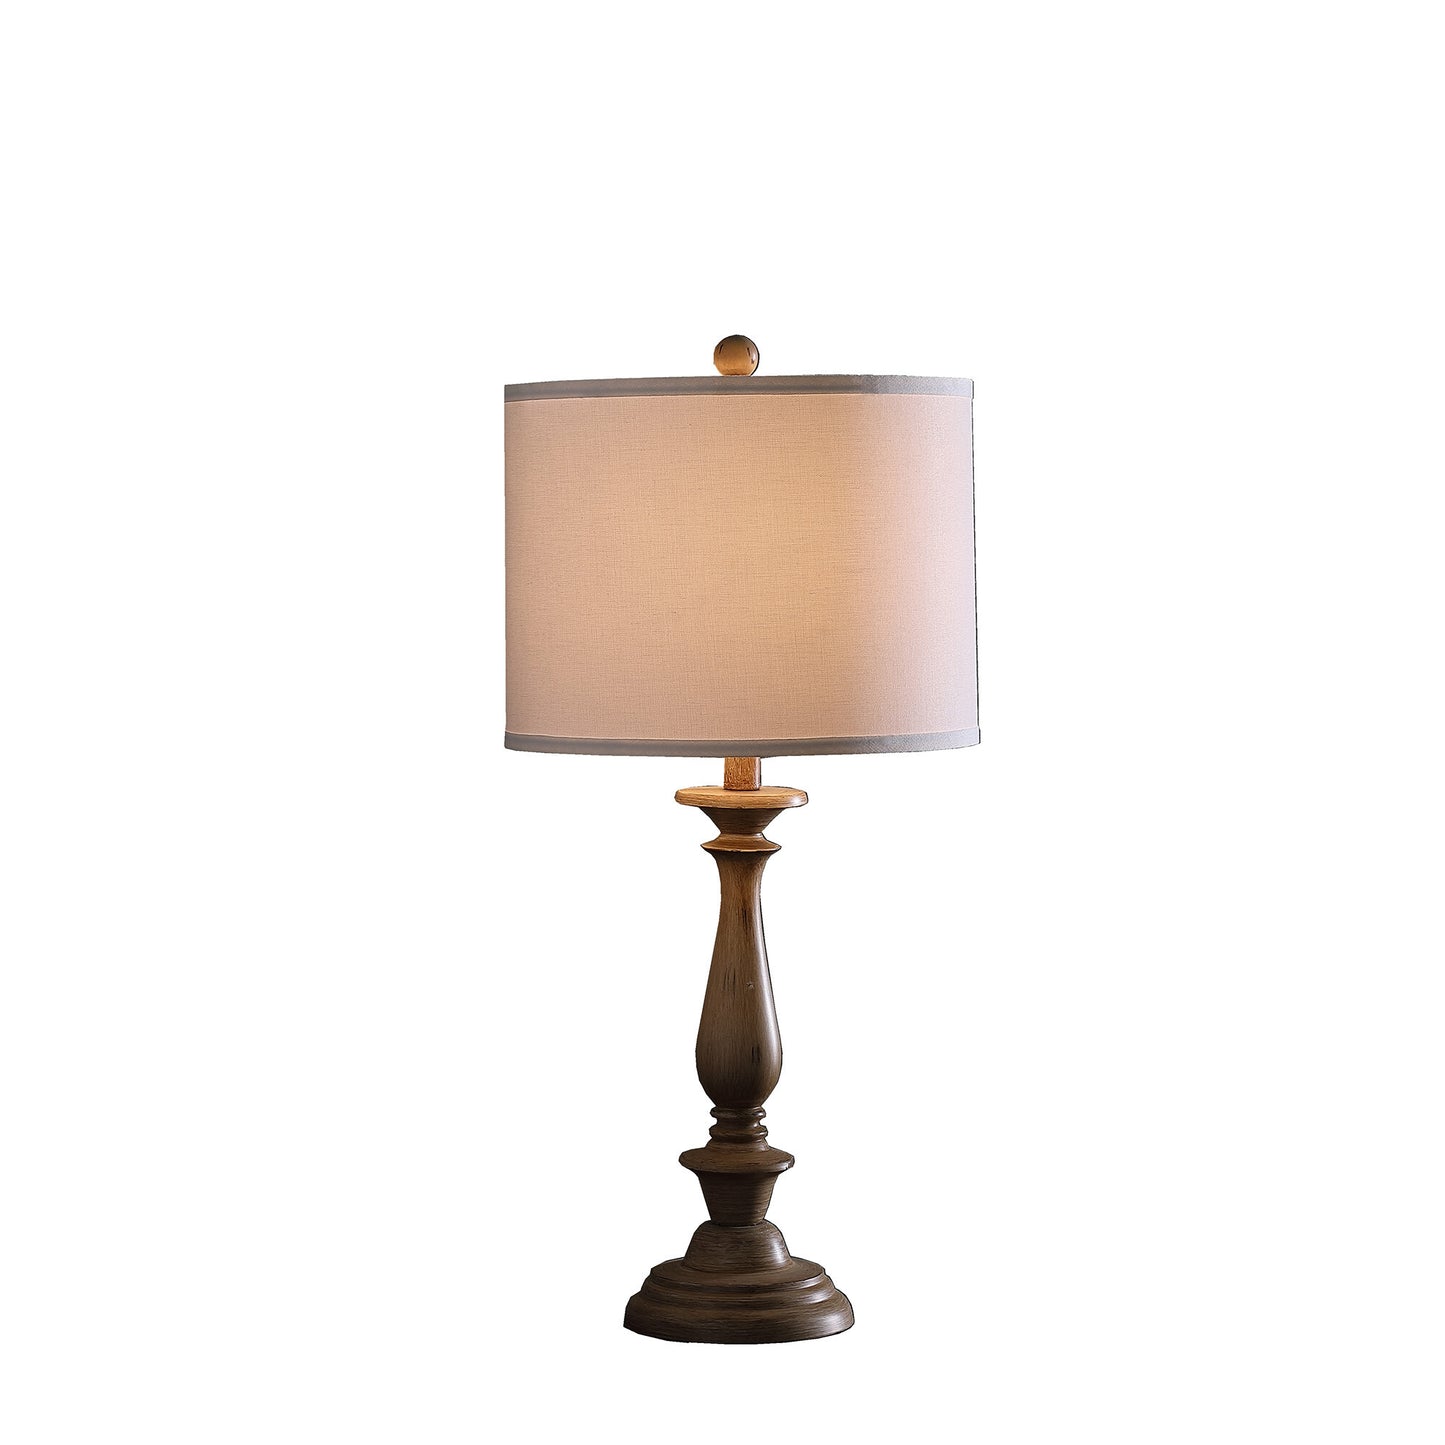 28" Rustic Taupe Cream Candlestick Table Lamp With White Shade